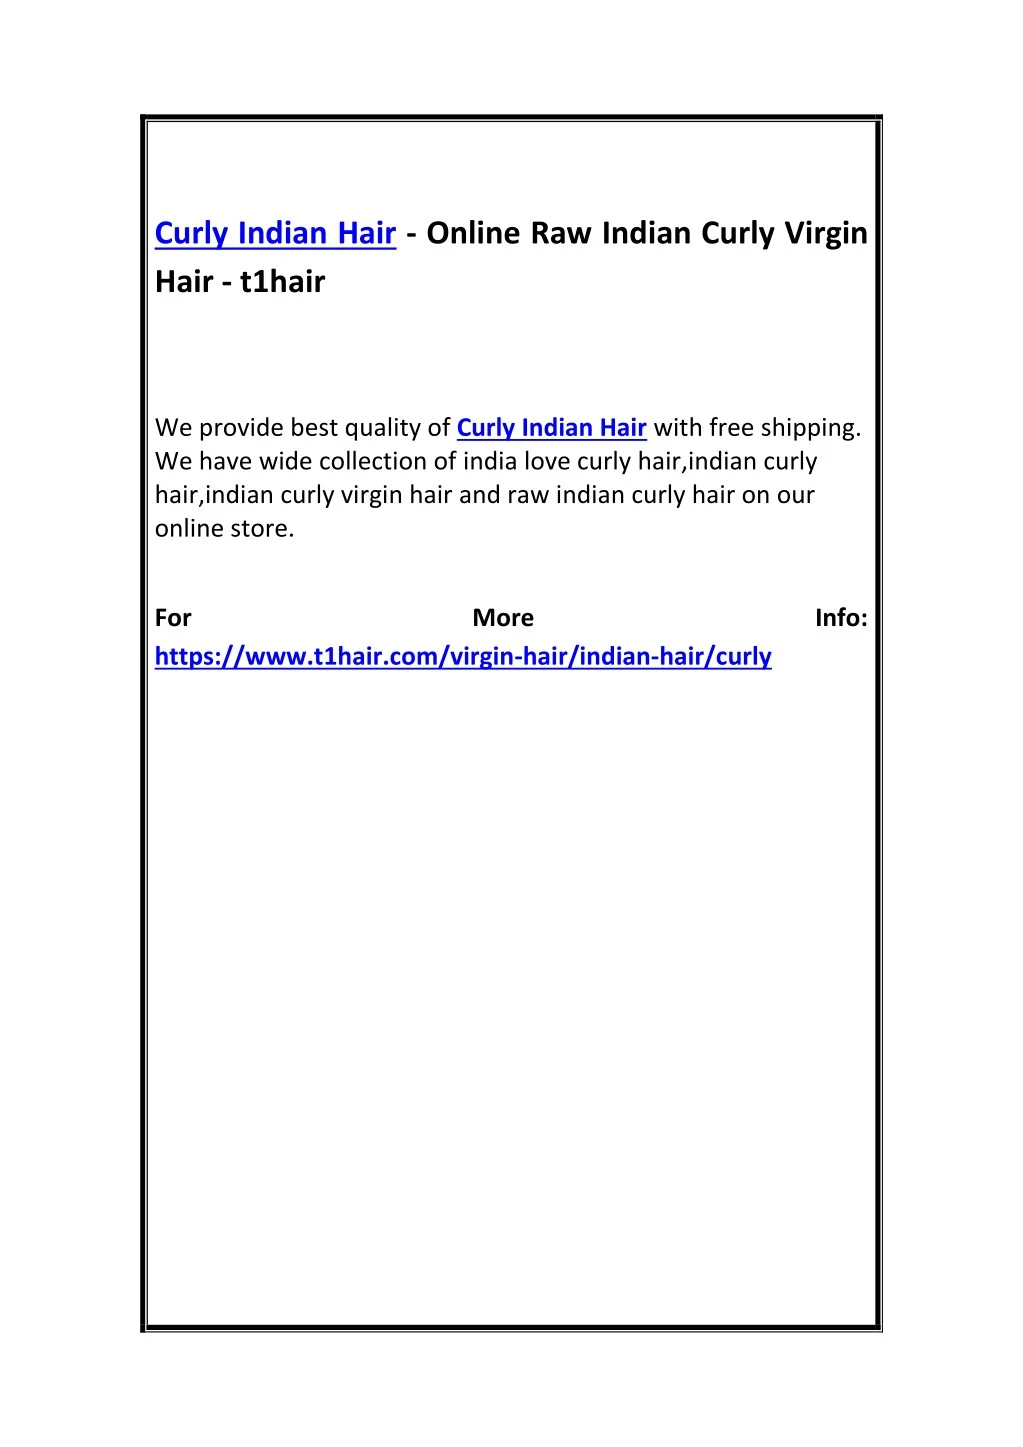 curly indian hair online raw indian curly virgin